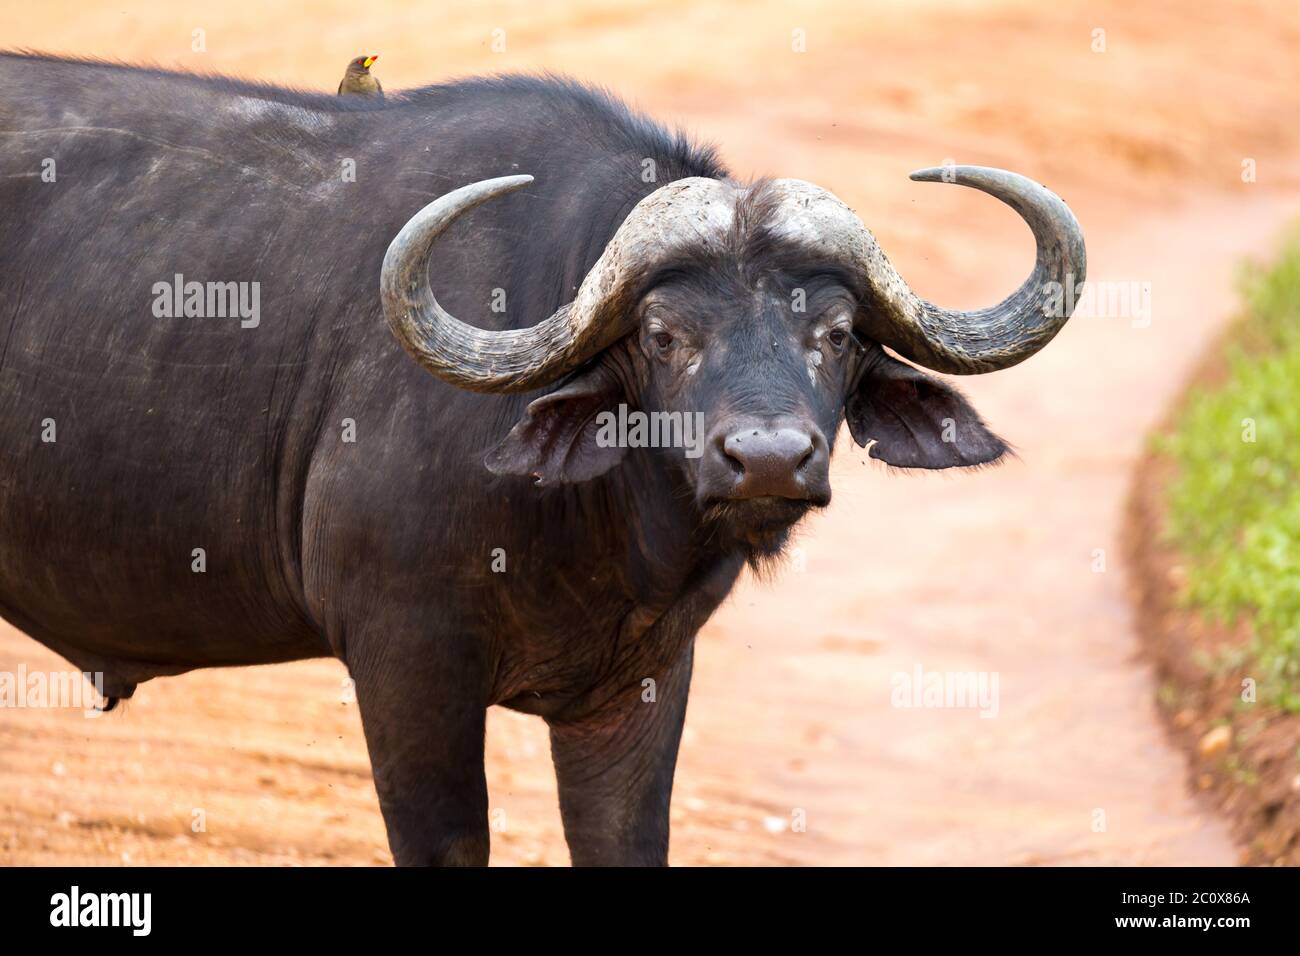 One big buffalo stands on a path in the savannah Stock Photo